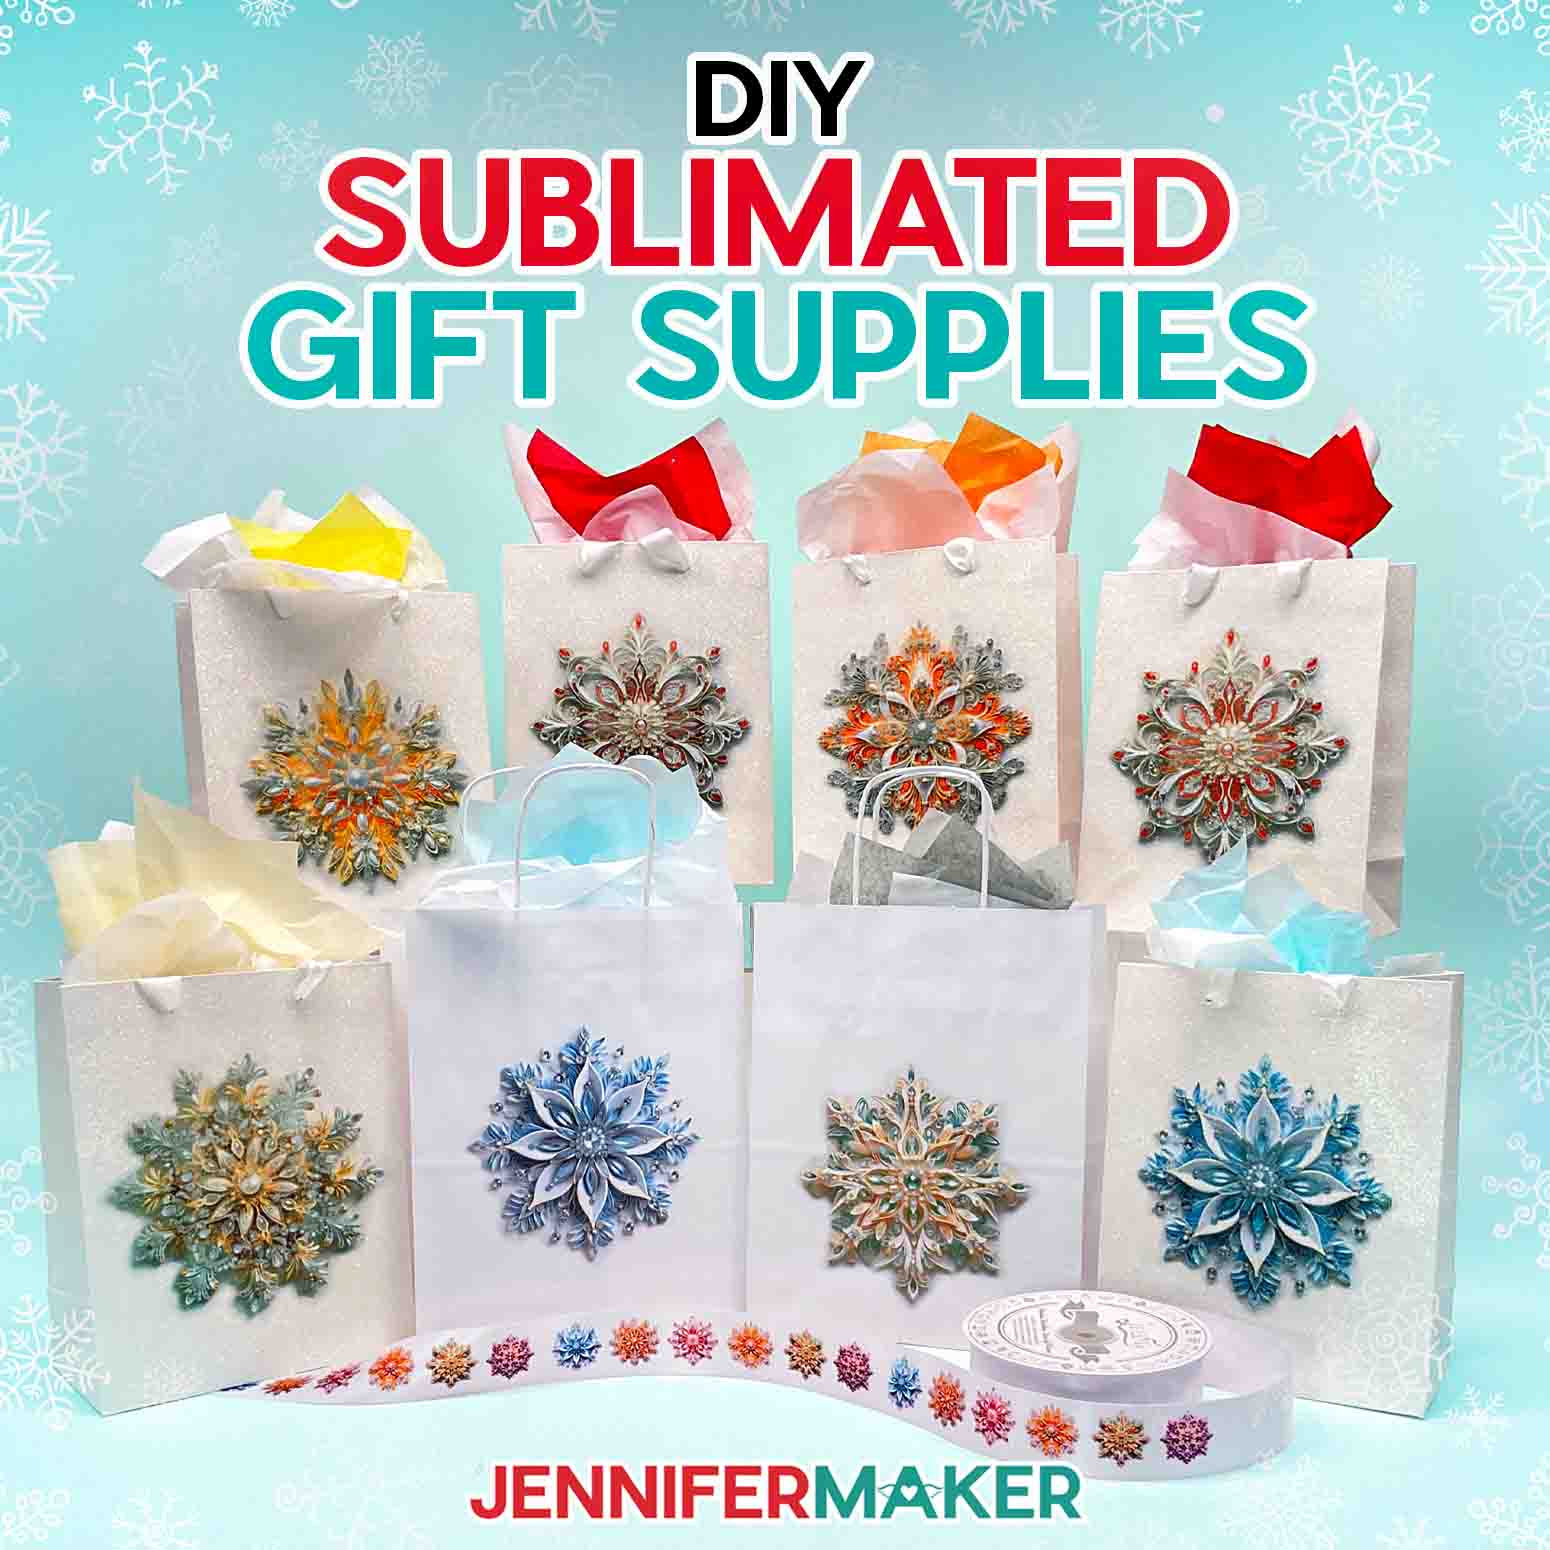 Custom Sublimation Gift Supplies & Bags for the Holidays!